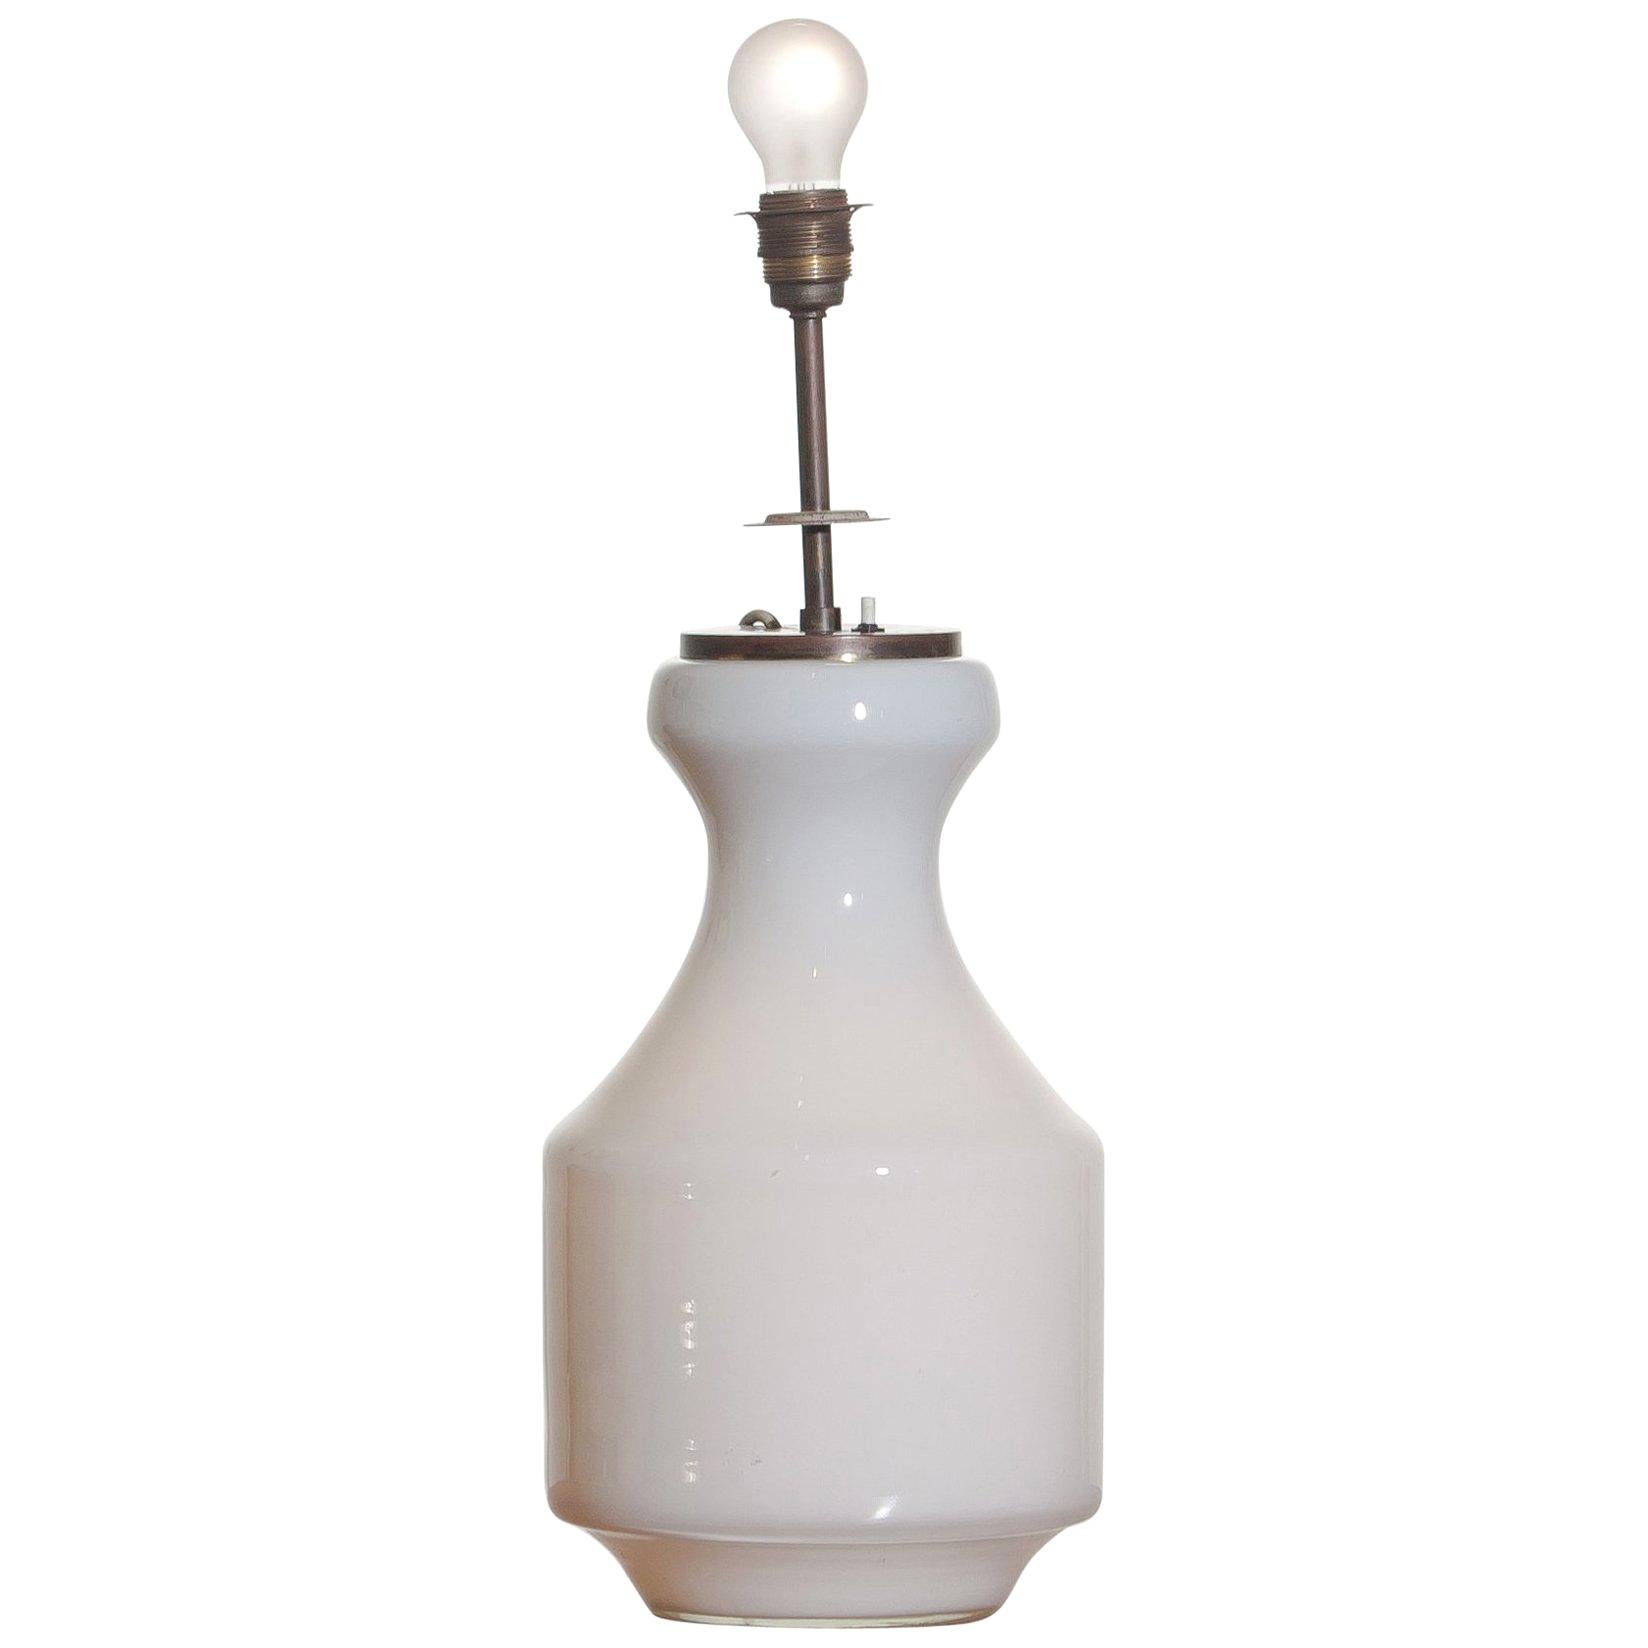 Mid-Century Modern 1950s, White Glass Vase Table or Floor Lamp with Internal Lighting by Murano